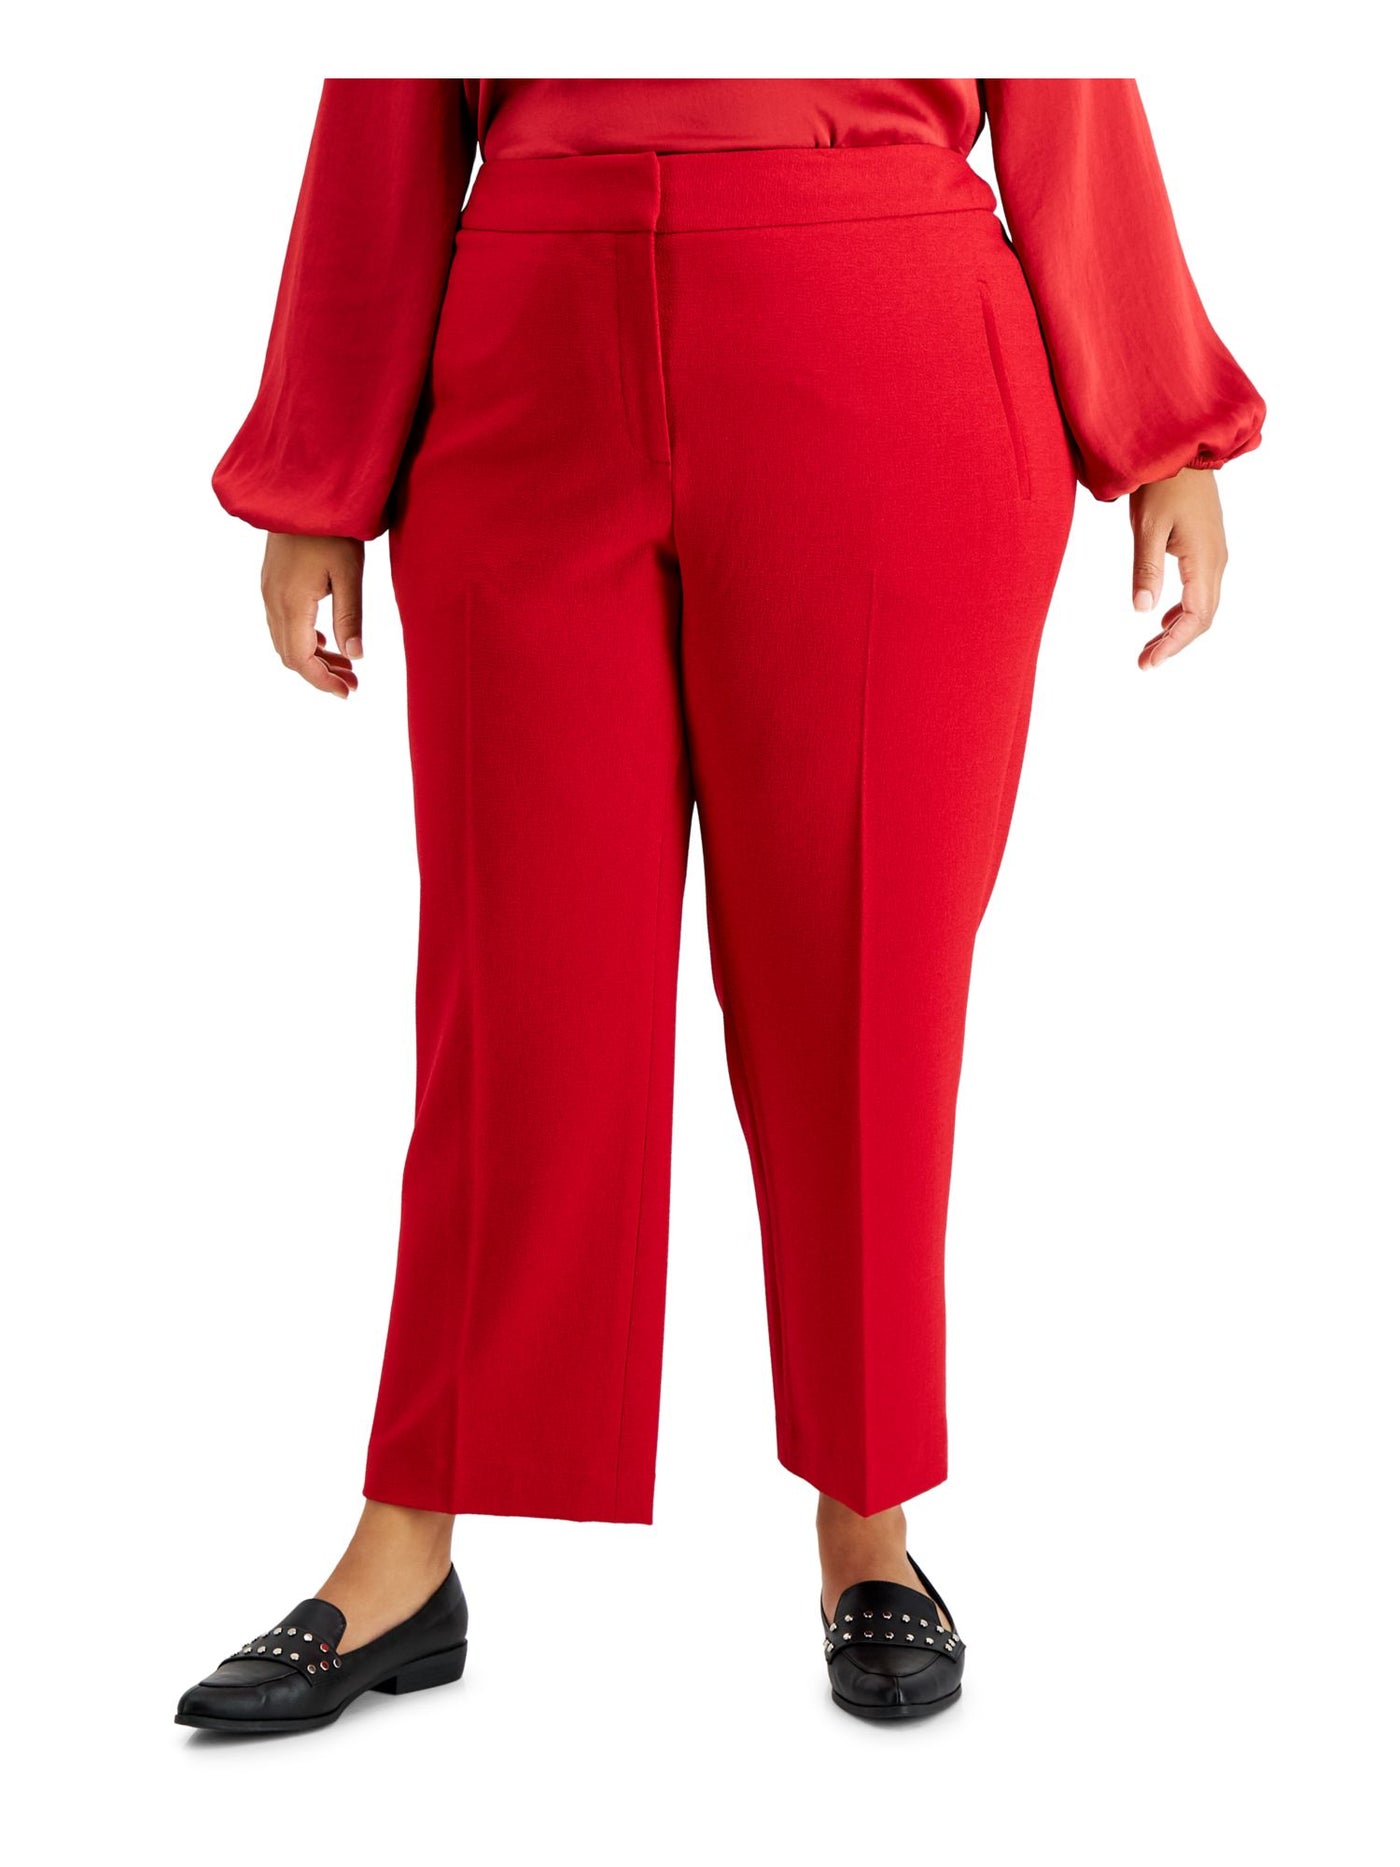 BAR III Womens Red Pocketed Zippered Textured High Rise Wear To Work Straight leg Pants Plus 22W